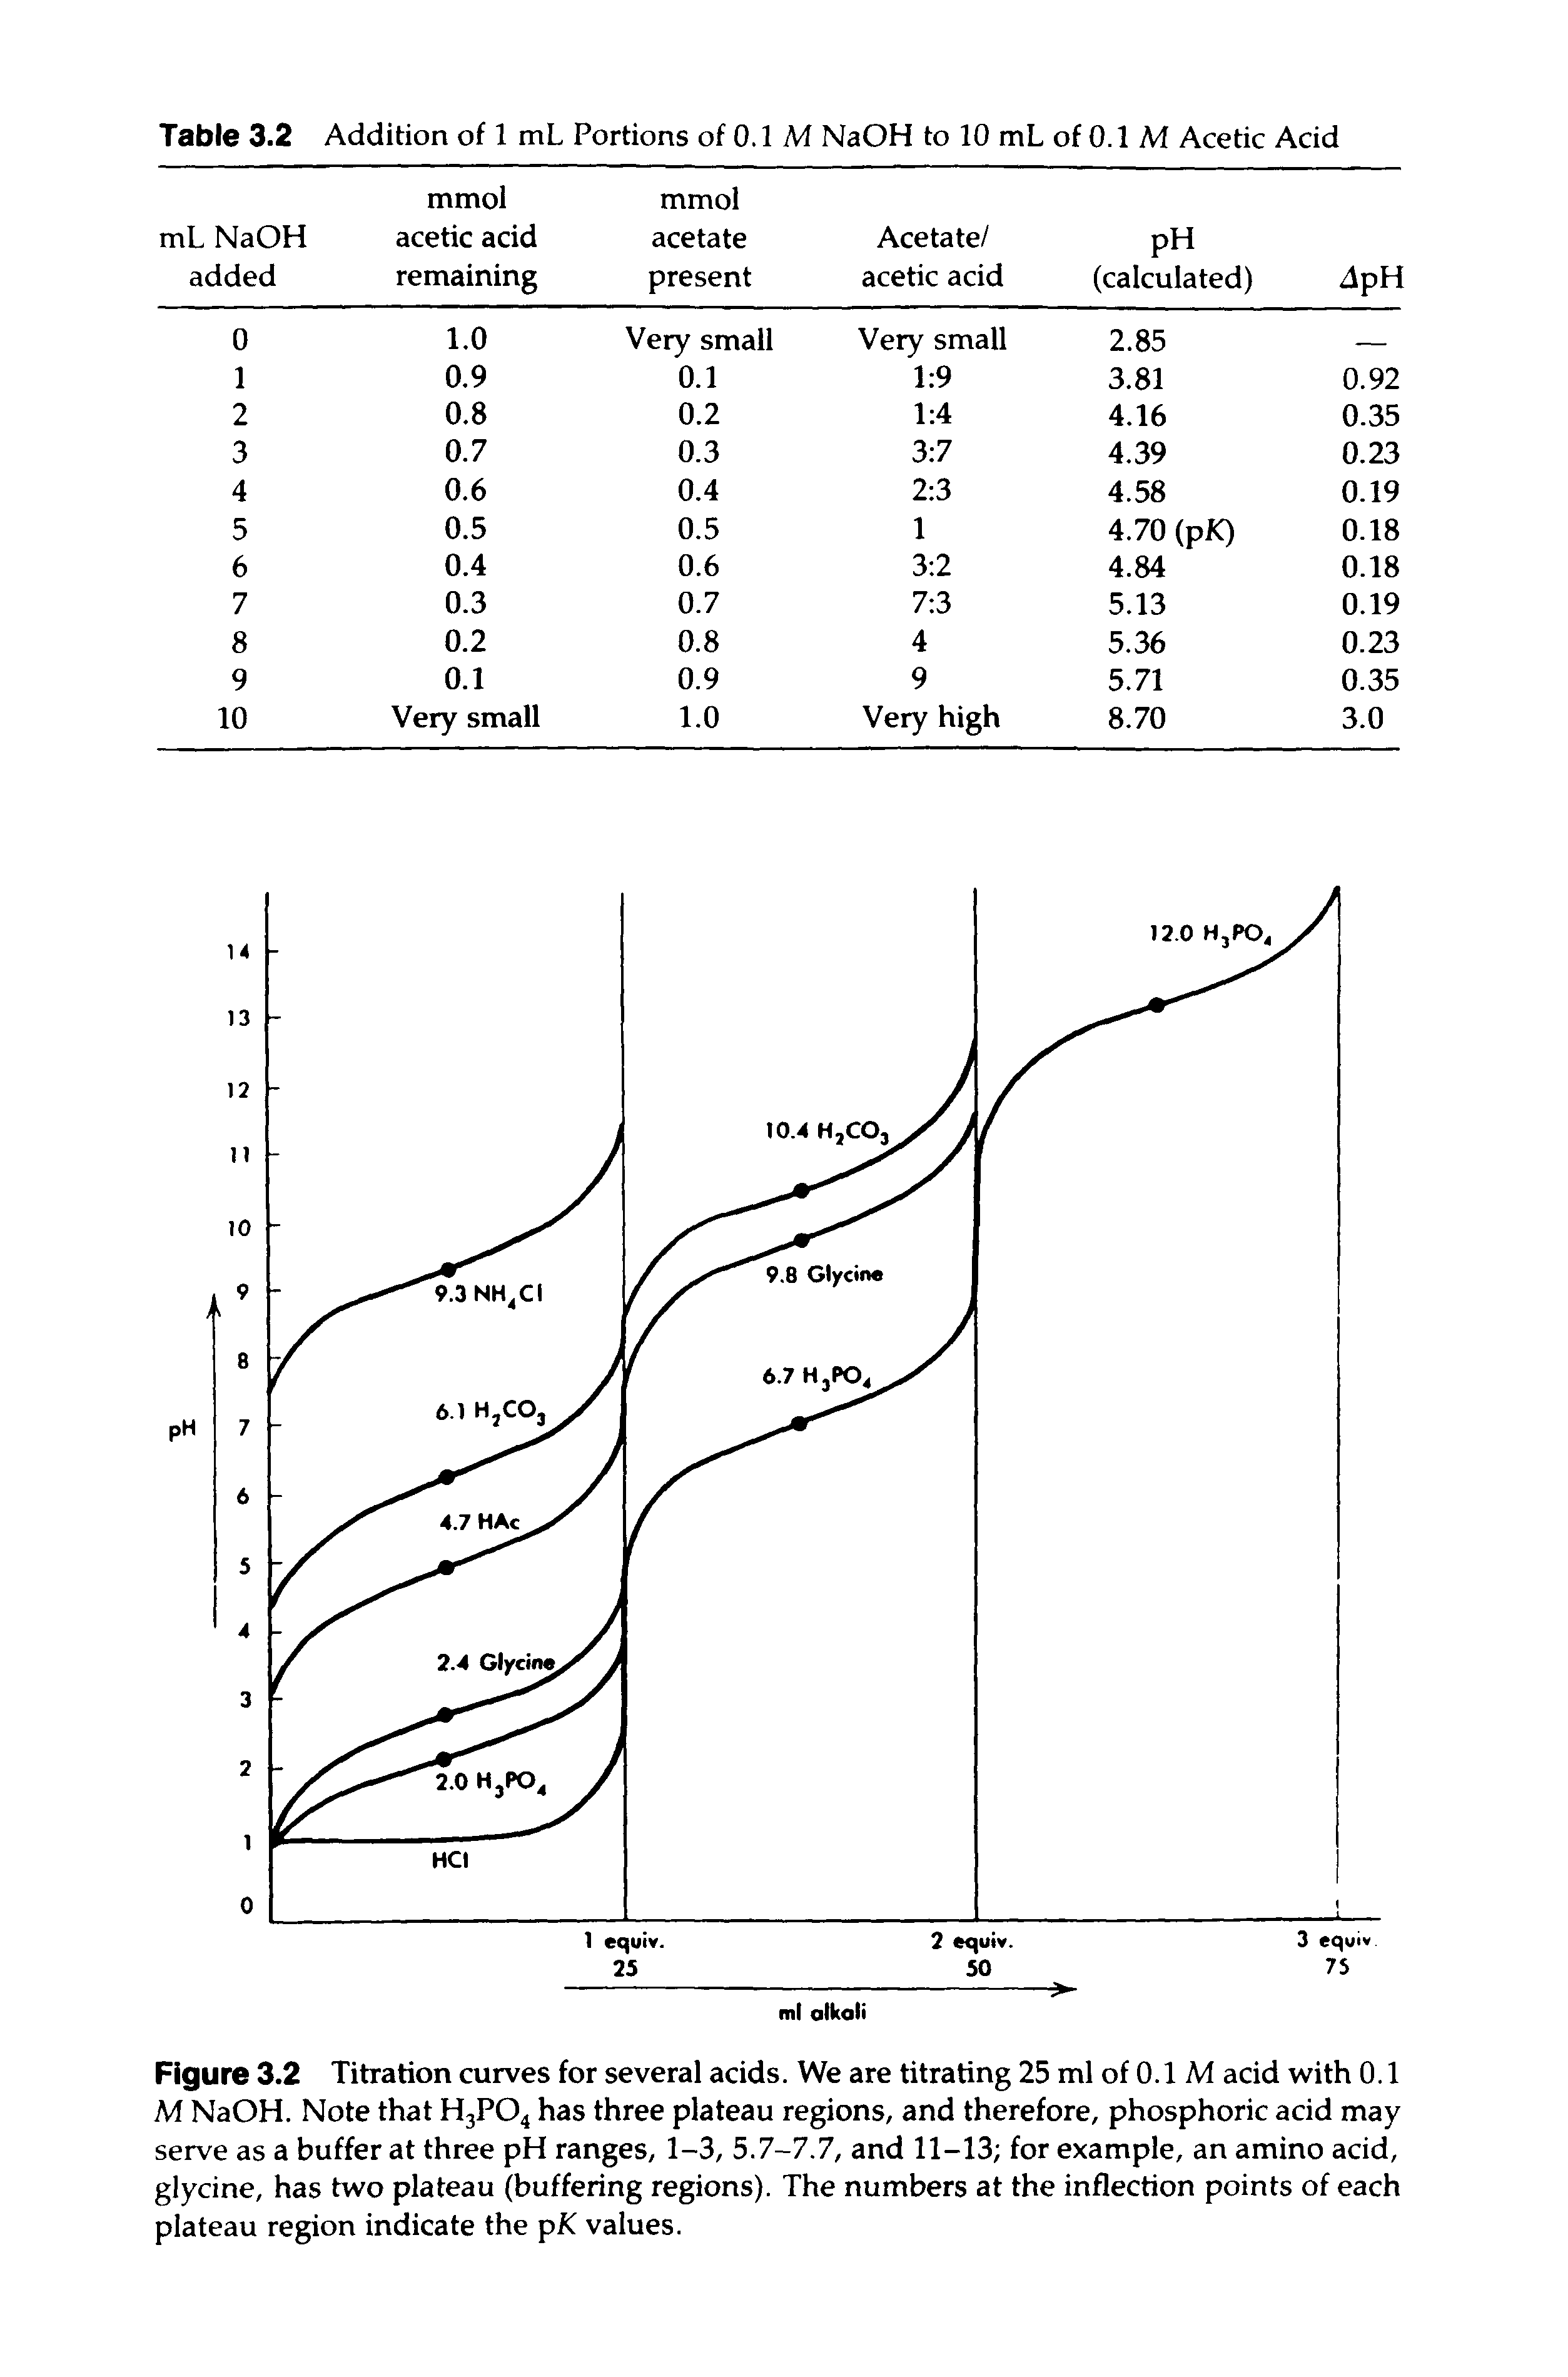 Figure 3.2 Titration curves for several acids. We are titrating 25 ml of 0.1 M acid with 0.1 M NaOH. Note that H3P04 has three plateau regions, and therefore, phosphoric acid may serve as a buffer at three pH ranges, 1-3, 5.7-7.7, and 11-13 for example, an amino acid, glycine, has two plateau (buffering regions). The numbers at the inflection points of each plateau region indicate the pK values.